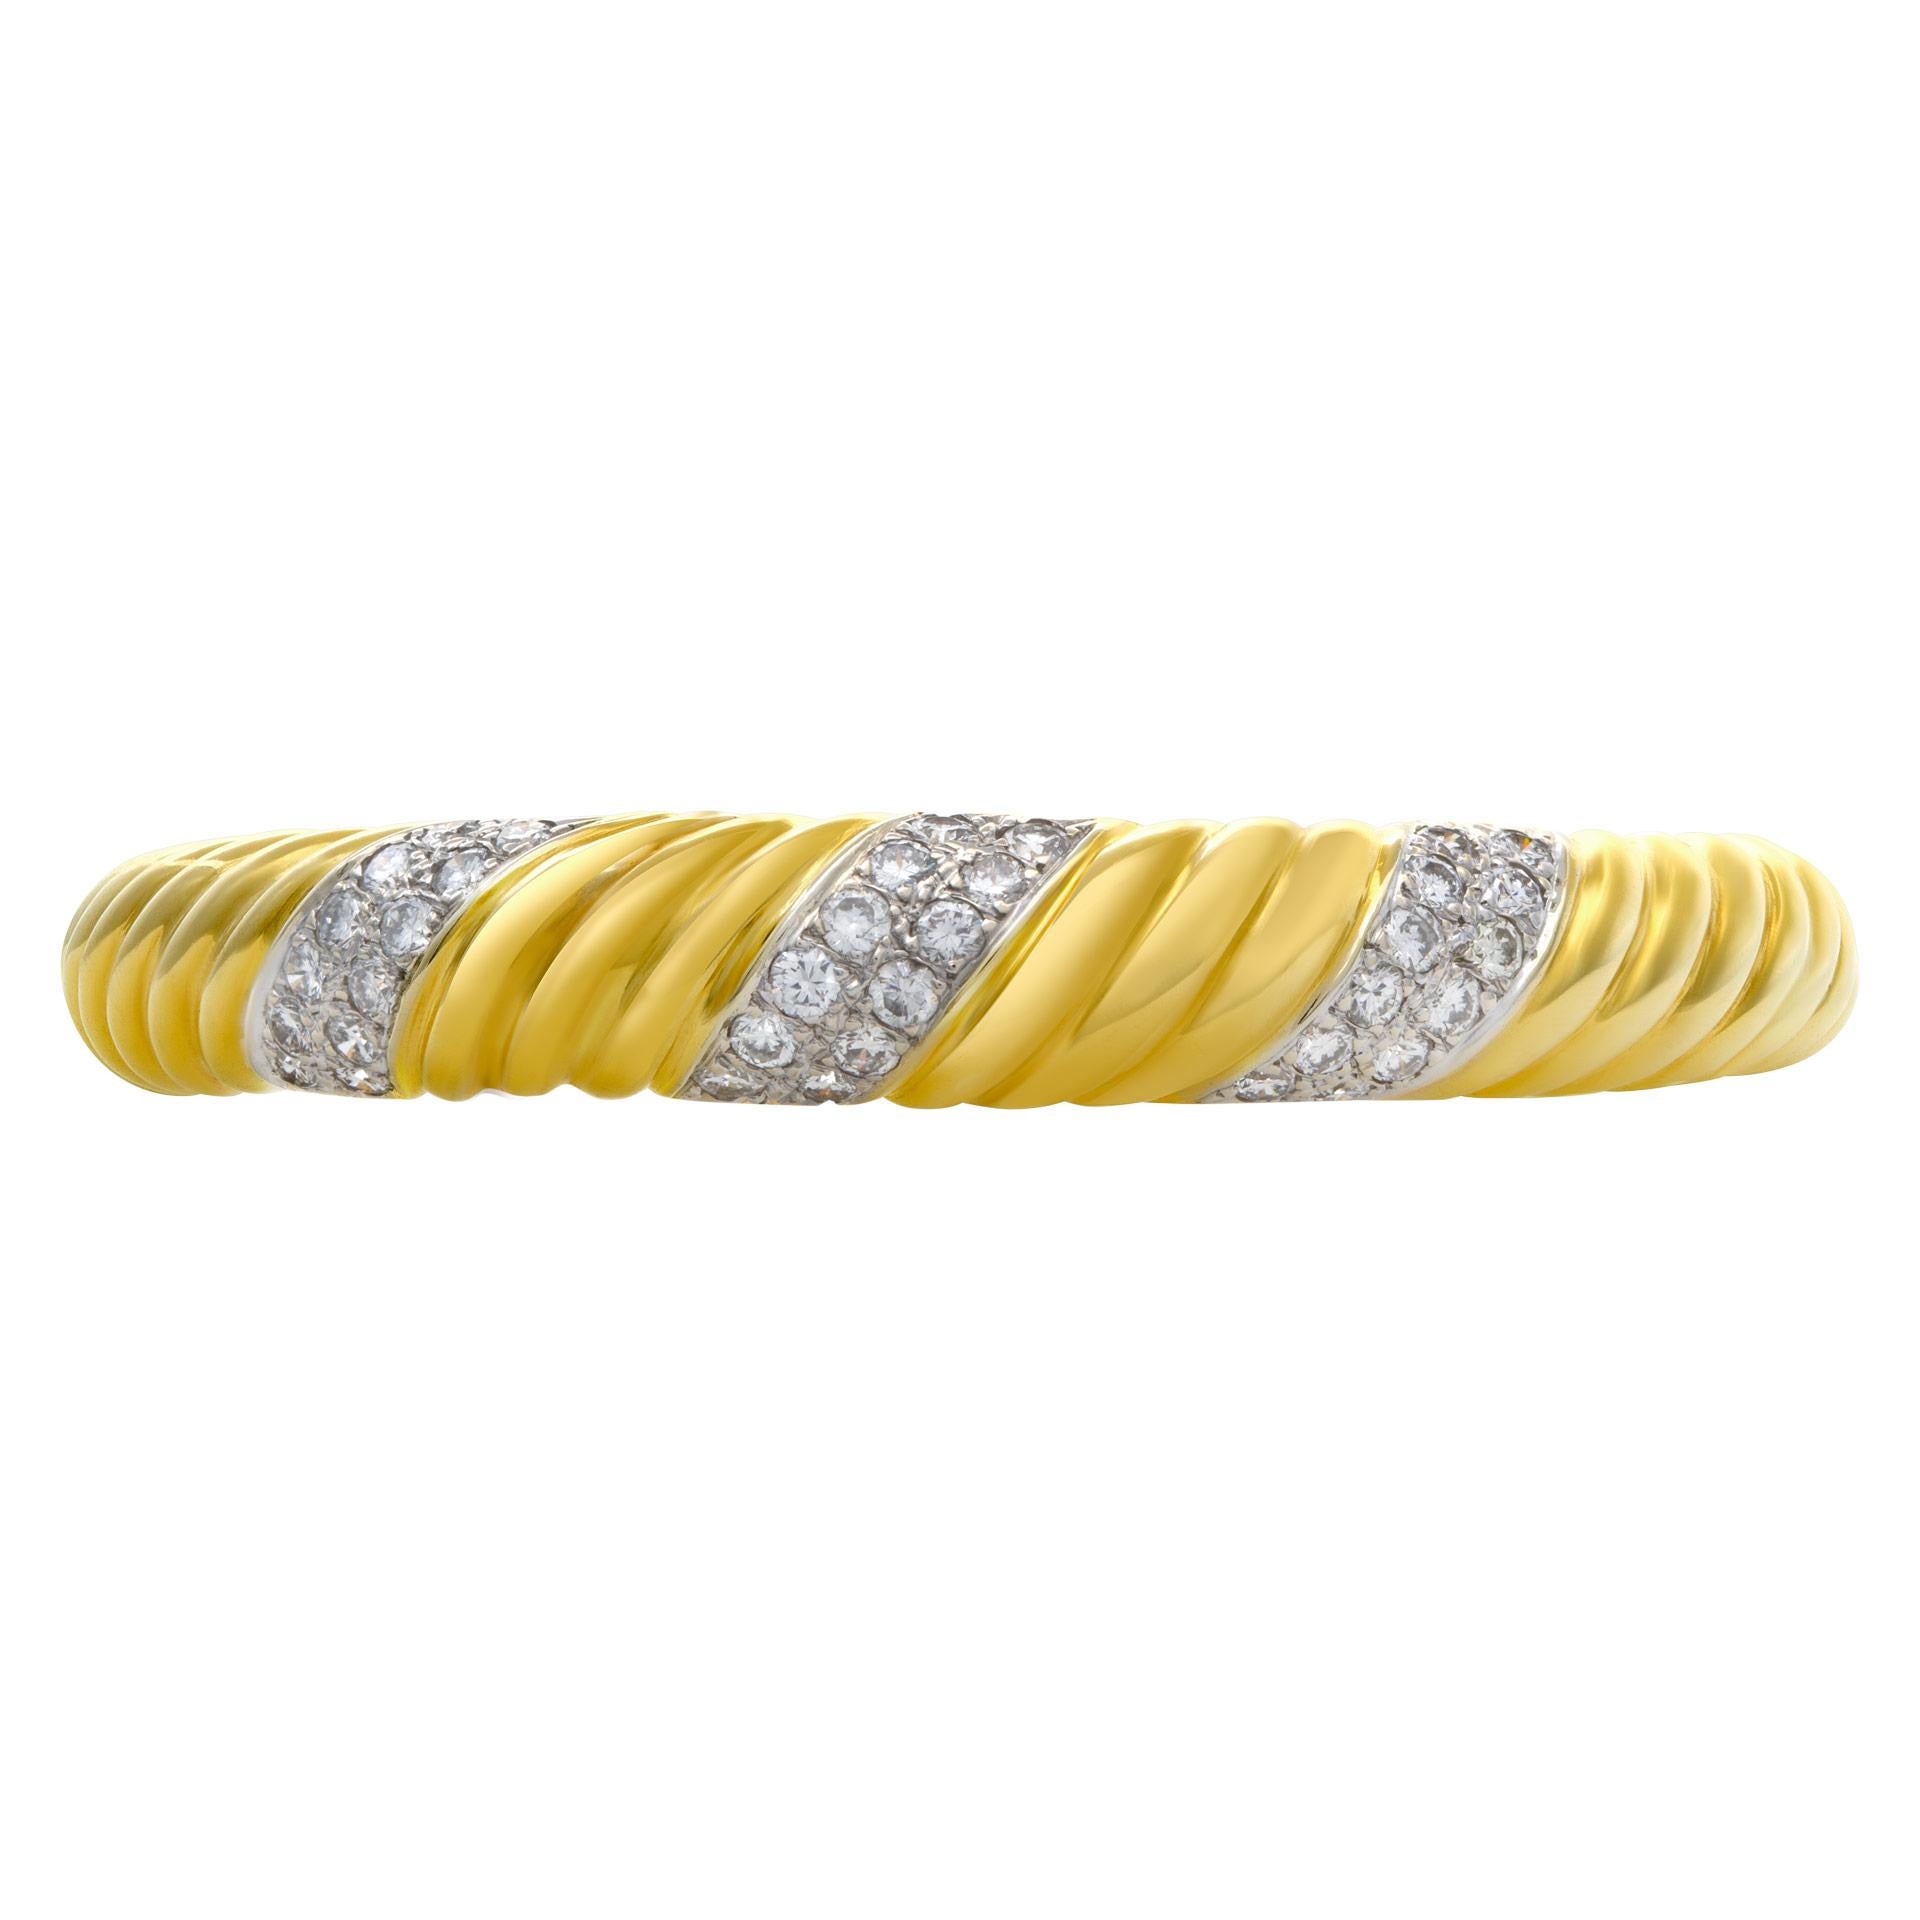 ESTIMATED RETAIL: $6,940 YOUR PRICE: $4,620 - Diamond bangle with approximately 1.80 carats in G-H color VS clarity roun cut diamonds set in 18k yellow gold. Fits 5.5